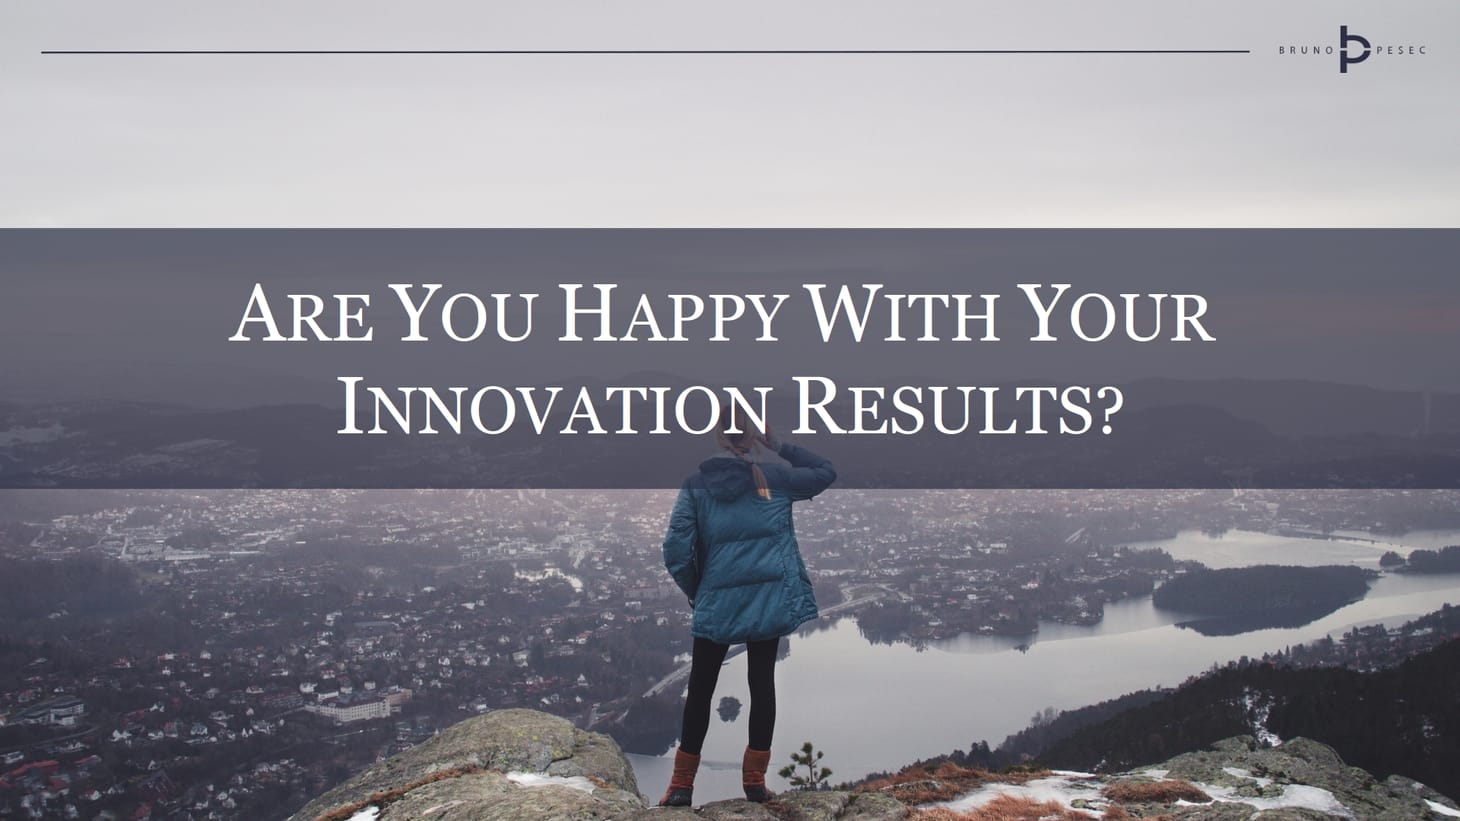 Are you happy with your innovation results?